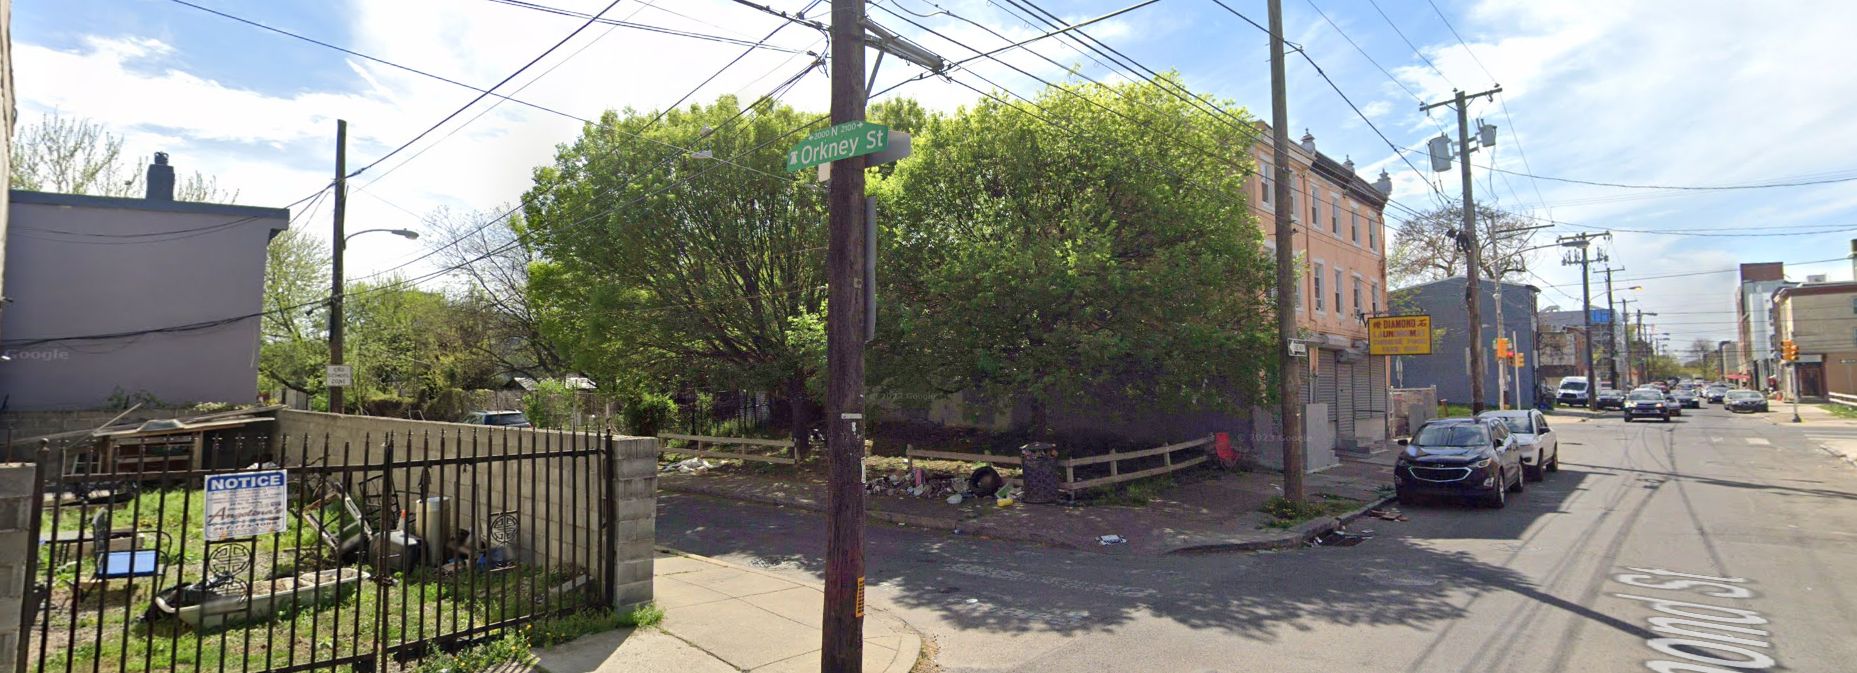 436 Diamond Street. Site conditions prior to redevelopment. Looking southwest. April 2023. Credit: Google Maps